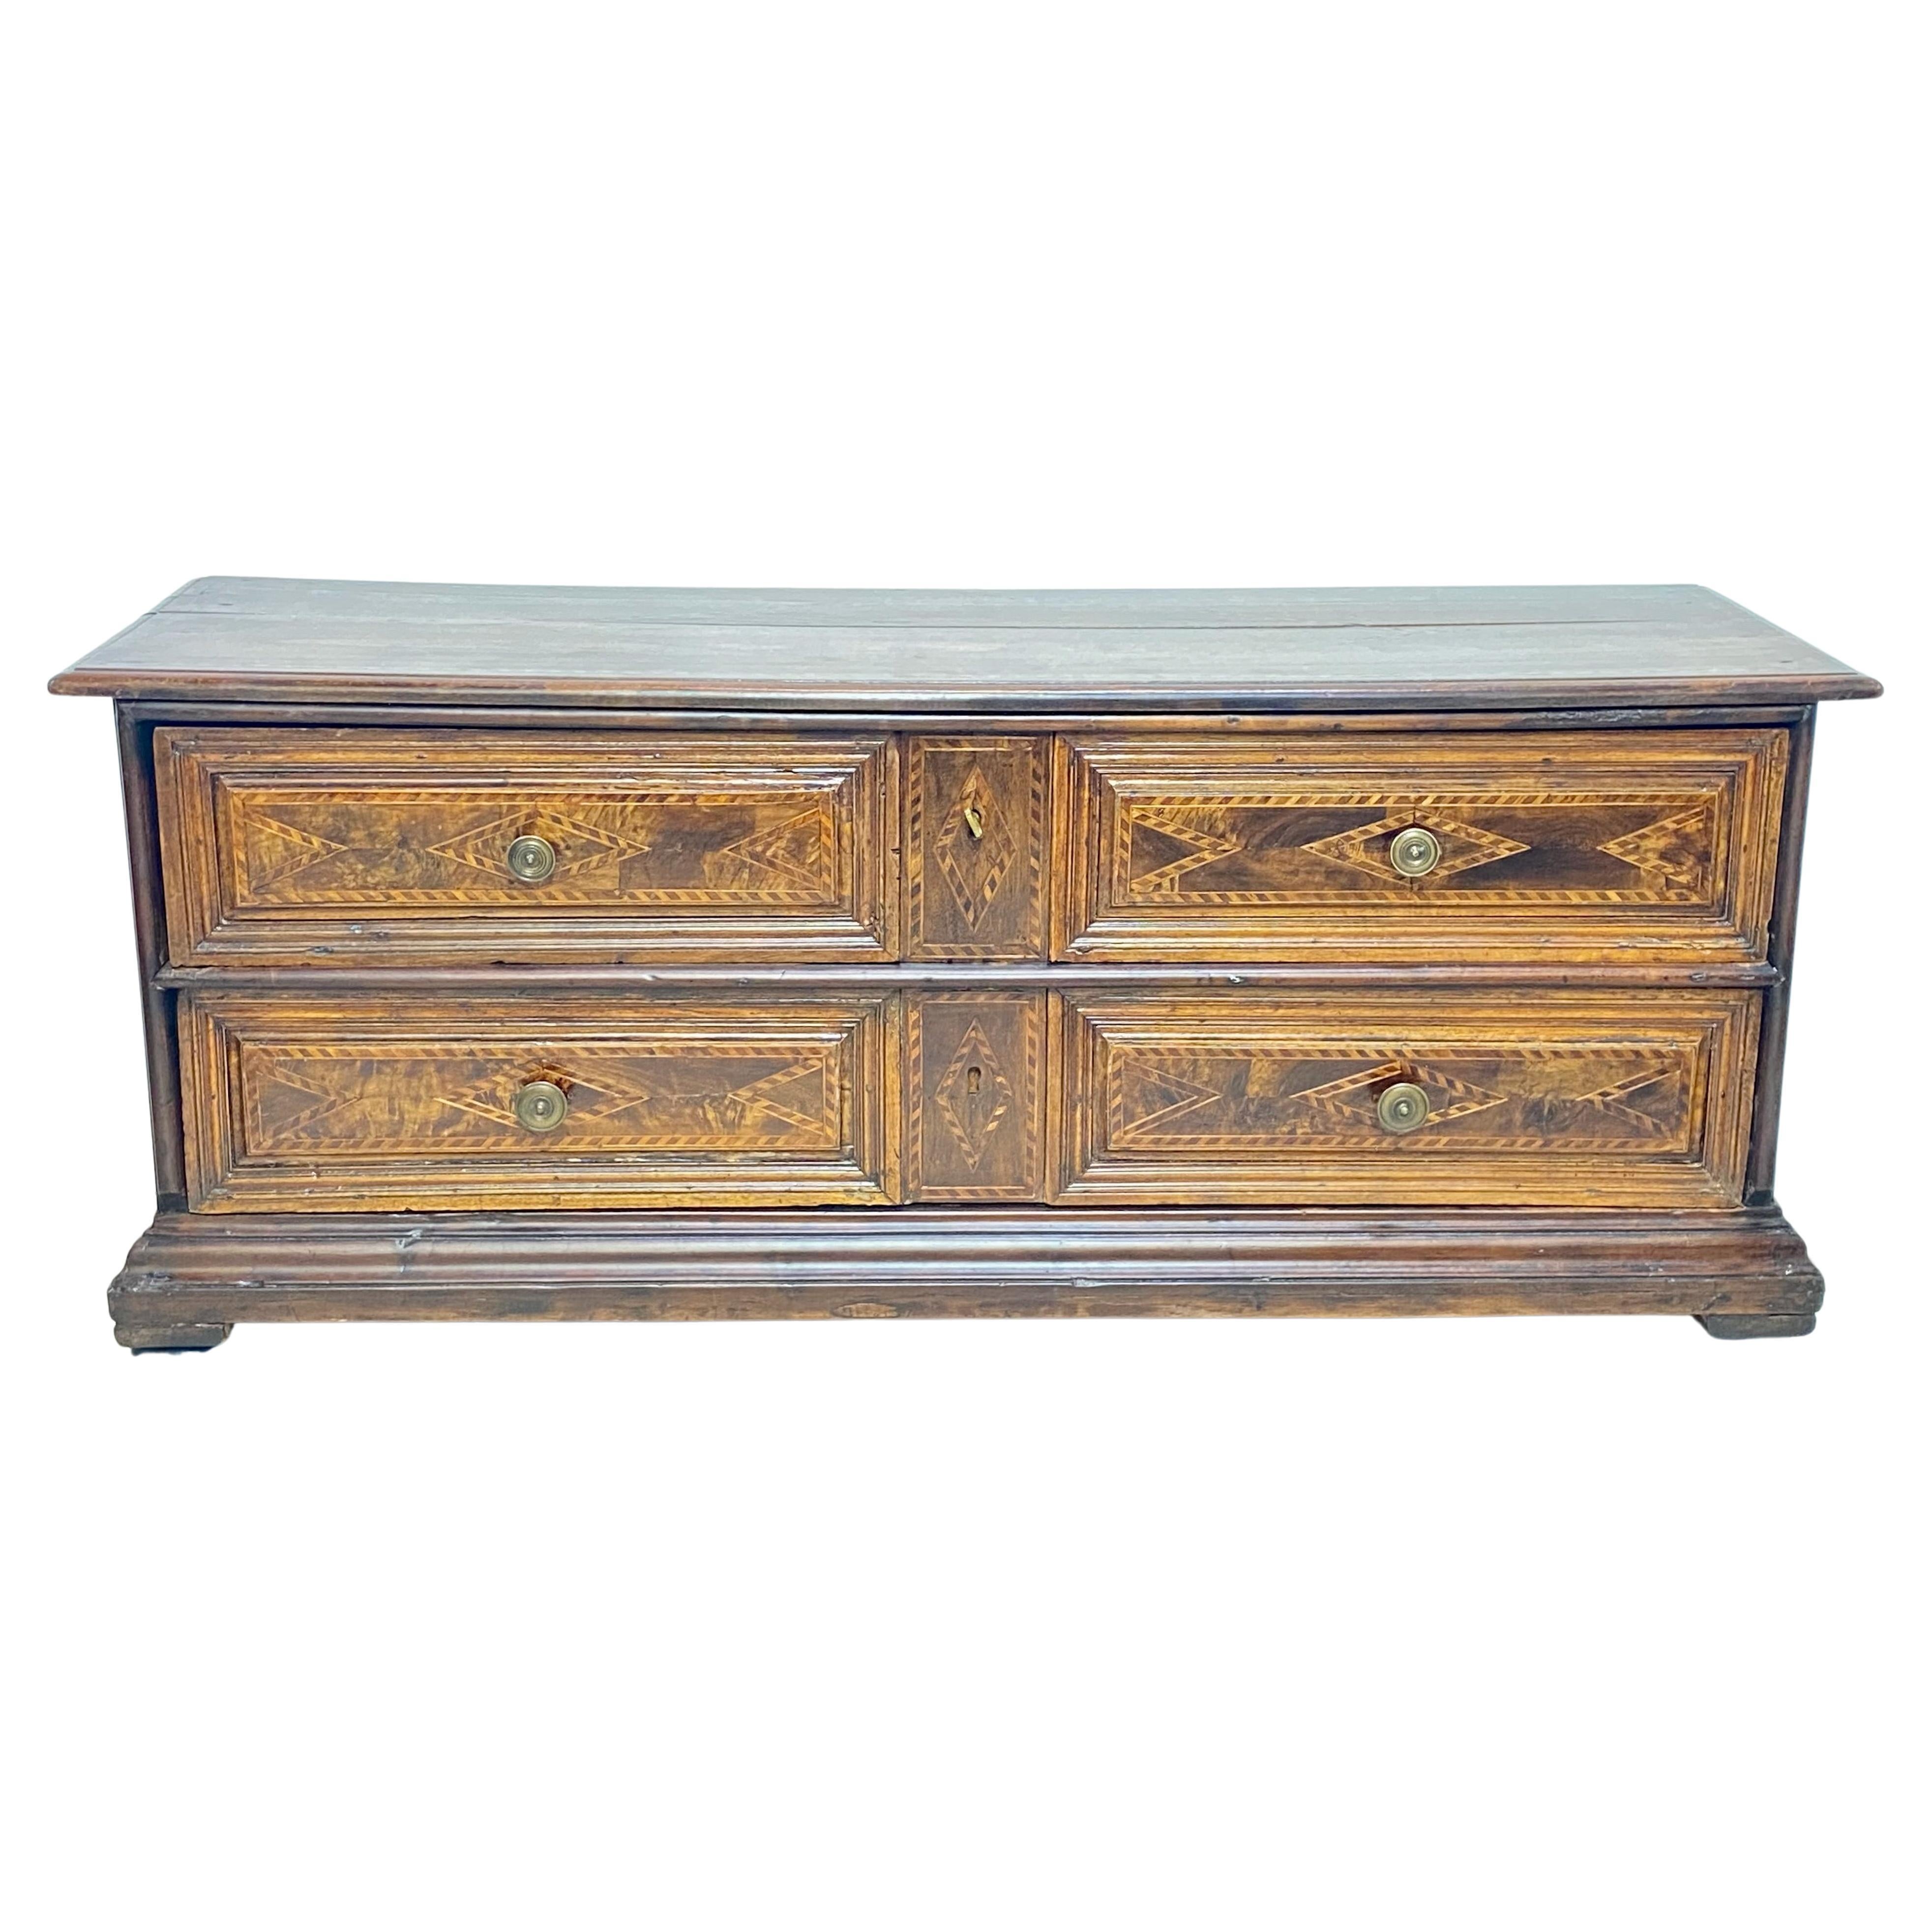 Early 18th Century Italian Walnut Low Two Drawer Chest / Bench